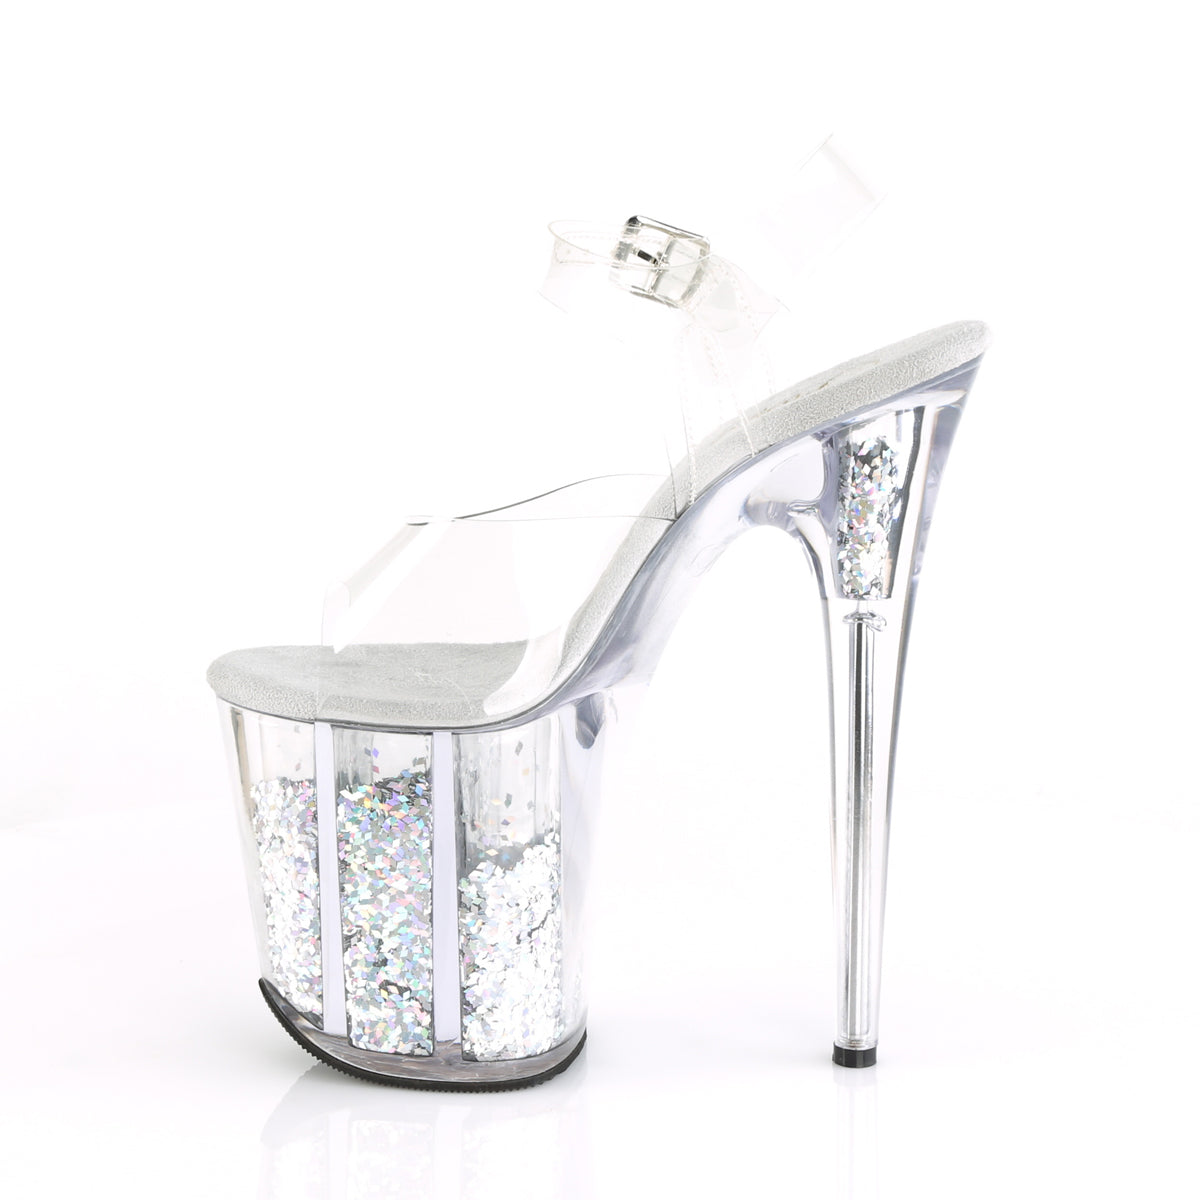 FLAMINGO-808GF 8" Heel Clear Silver Glitter Strippers Shoes-Pleaser- Sexy Shoes Pole Dance Heels